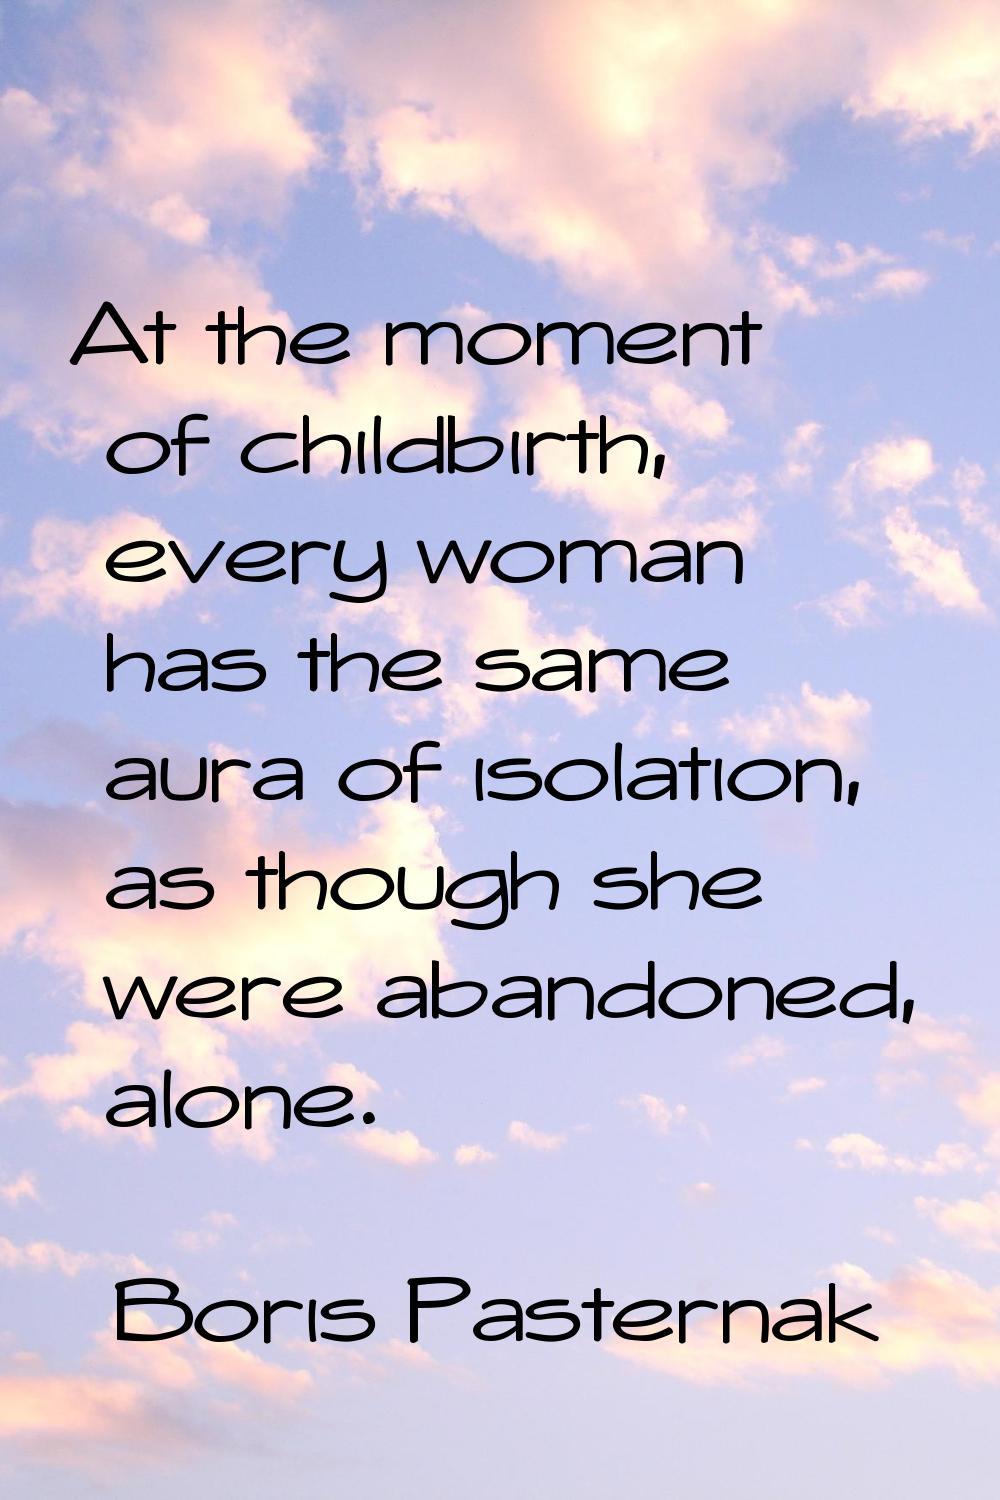 At the moment of childbirth, every woman has the same aura of isolation, as though she were abandon